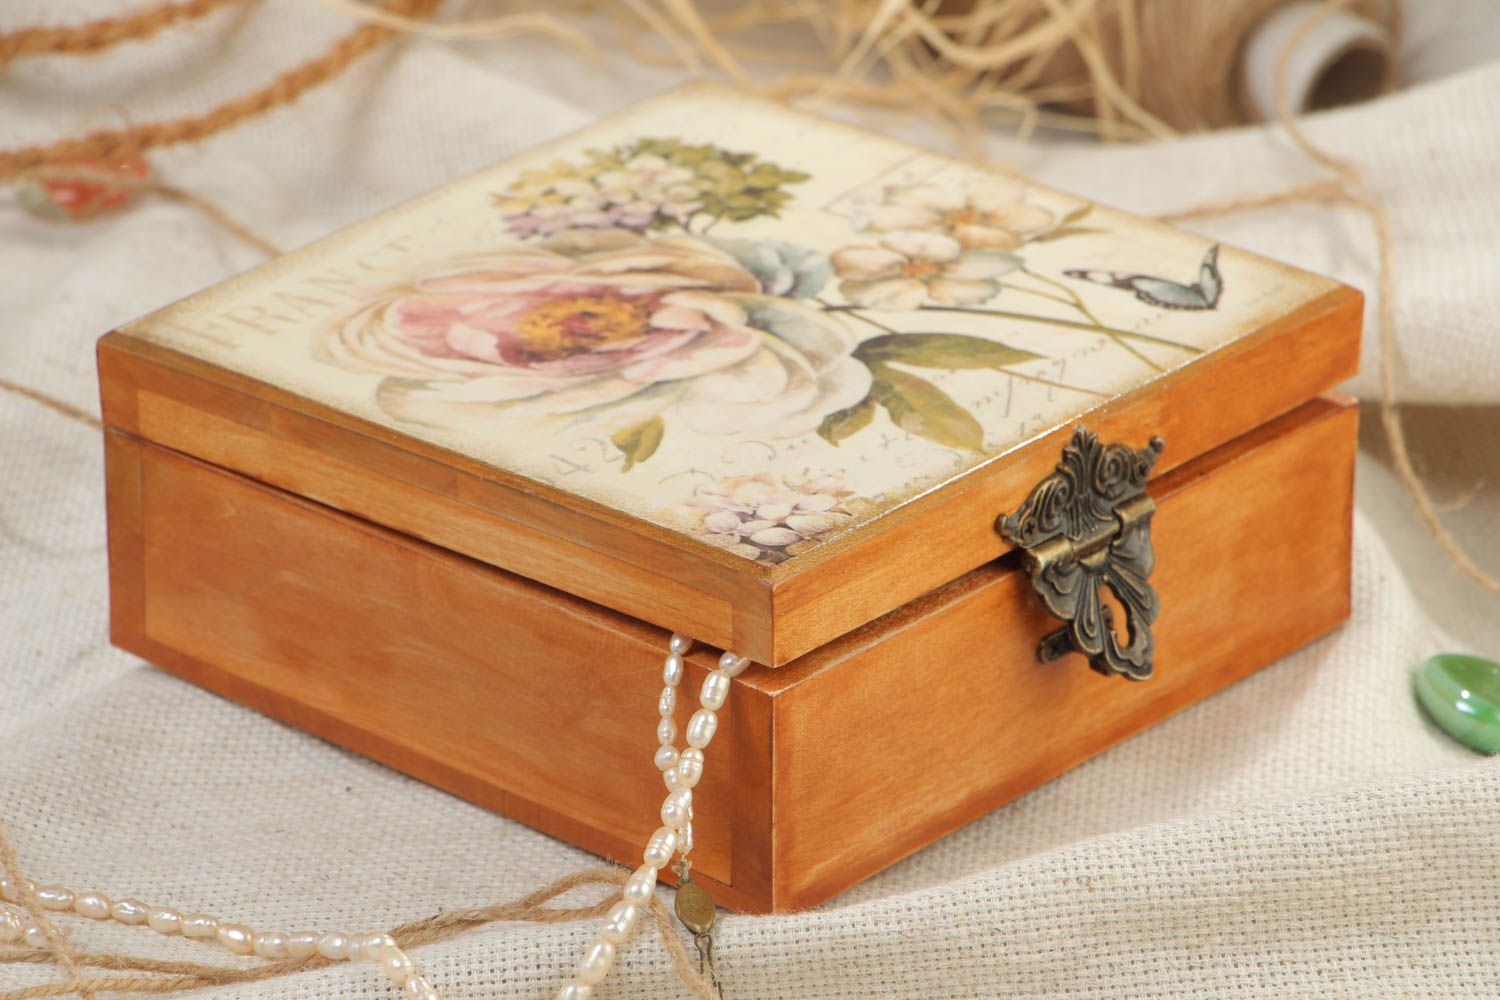 Handmade decorative square wooden jewelry box with floral retro print on lid photo 1